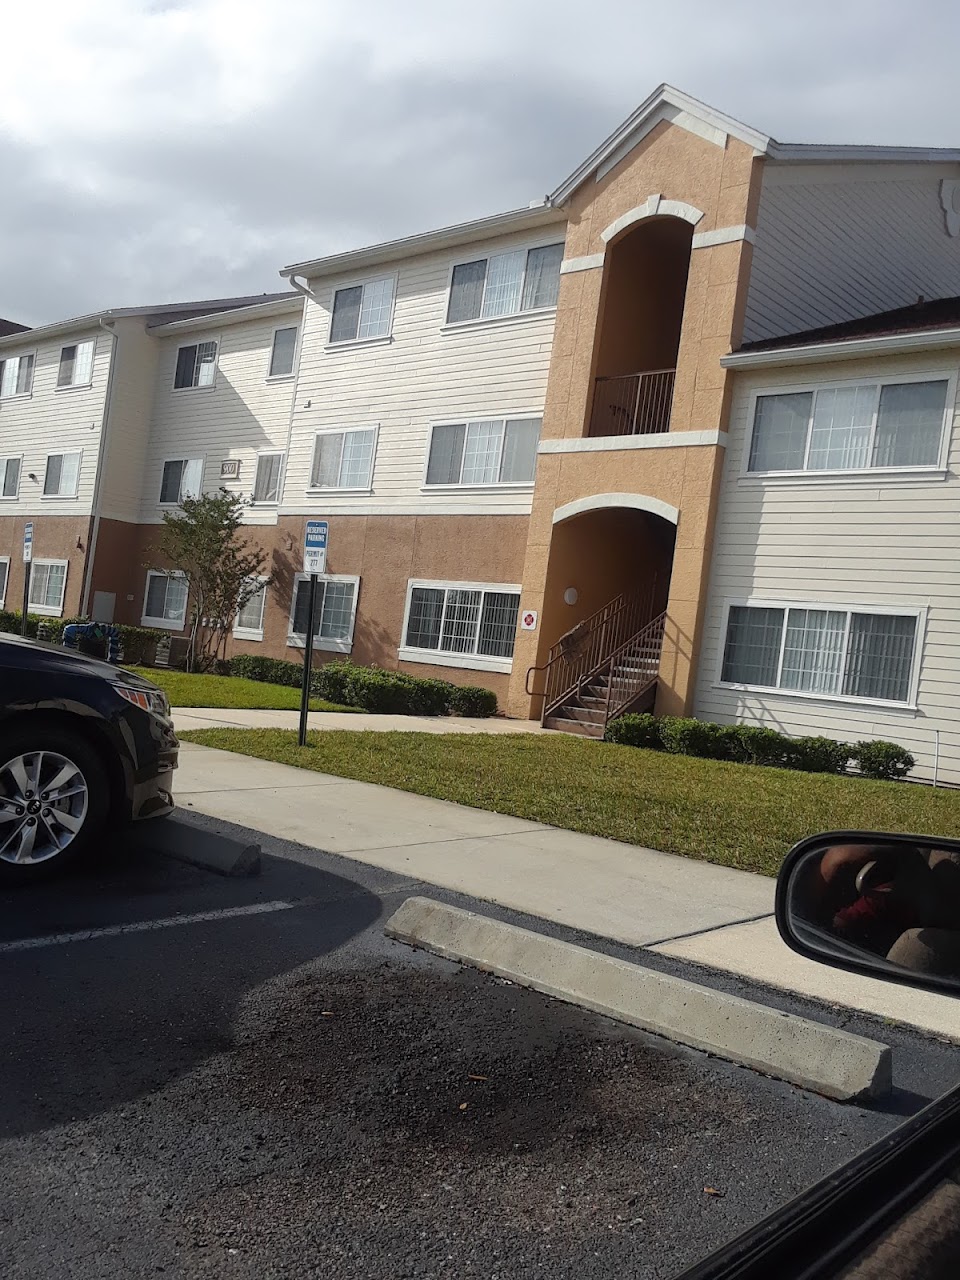 Photo of MISSION POINTE - JACKSONVILLE. Affordable housing located at 12450 BISCAYNE BLVD JACKSONVILLE, FL 32218